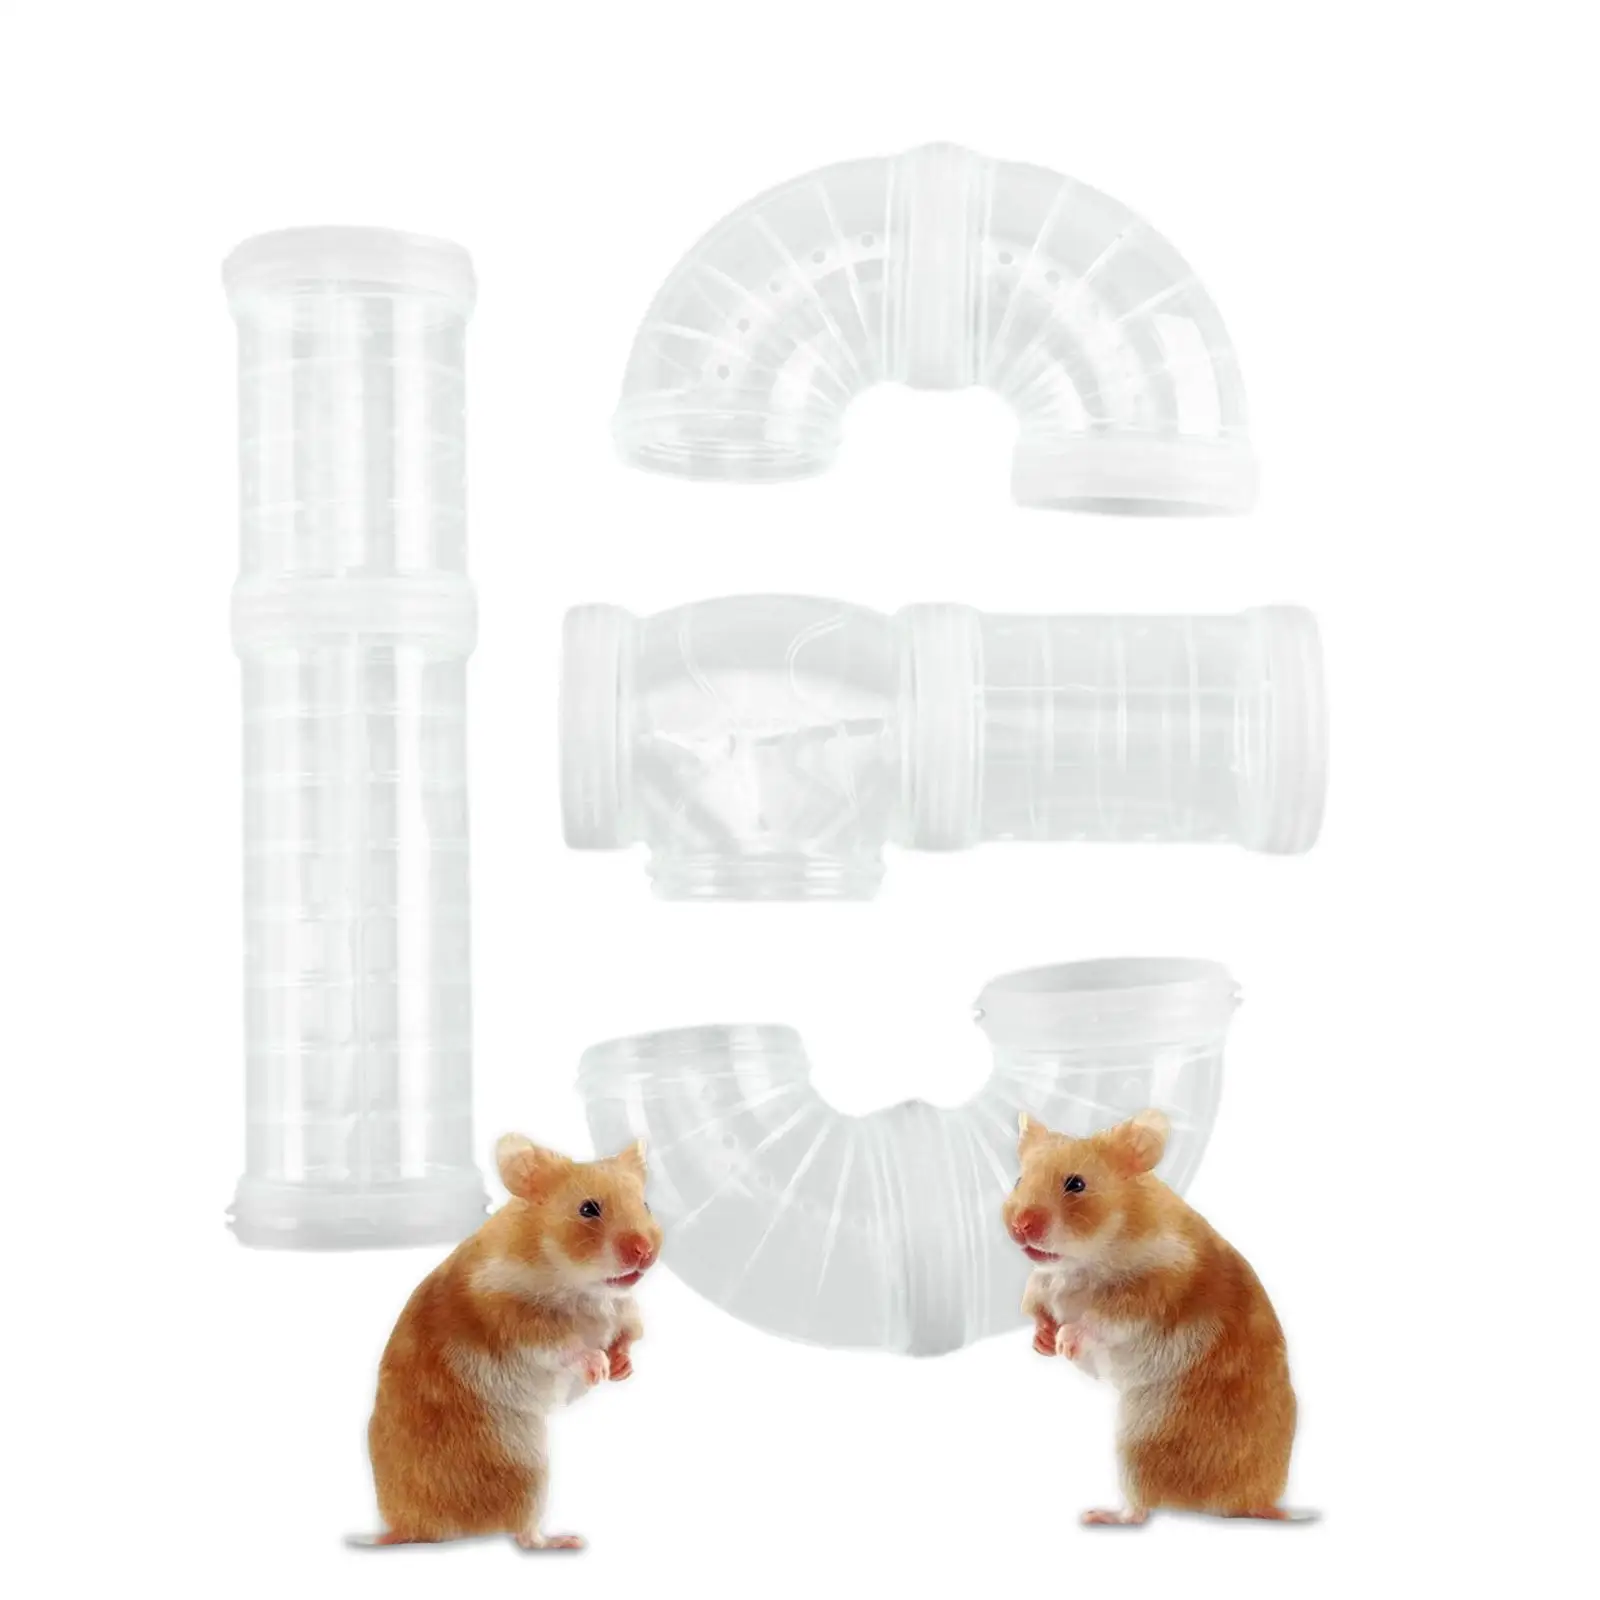 Hamster Tube Set 8Pcs Curved Pipe DIY Hamster Exercise Toys for Mouse Small Animals Rat Small Pet Toy Habitat Cage Accessories